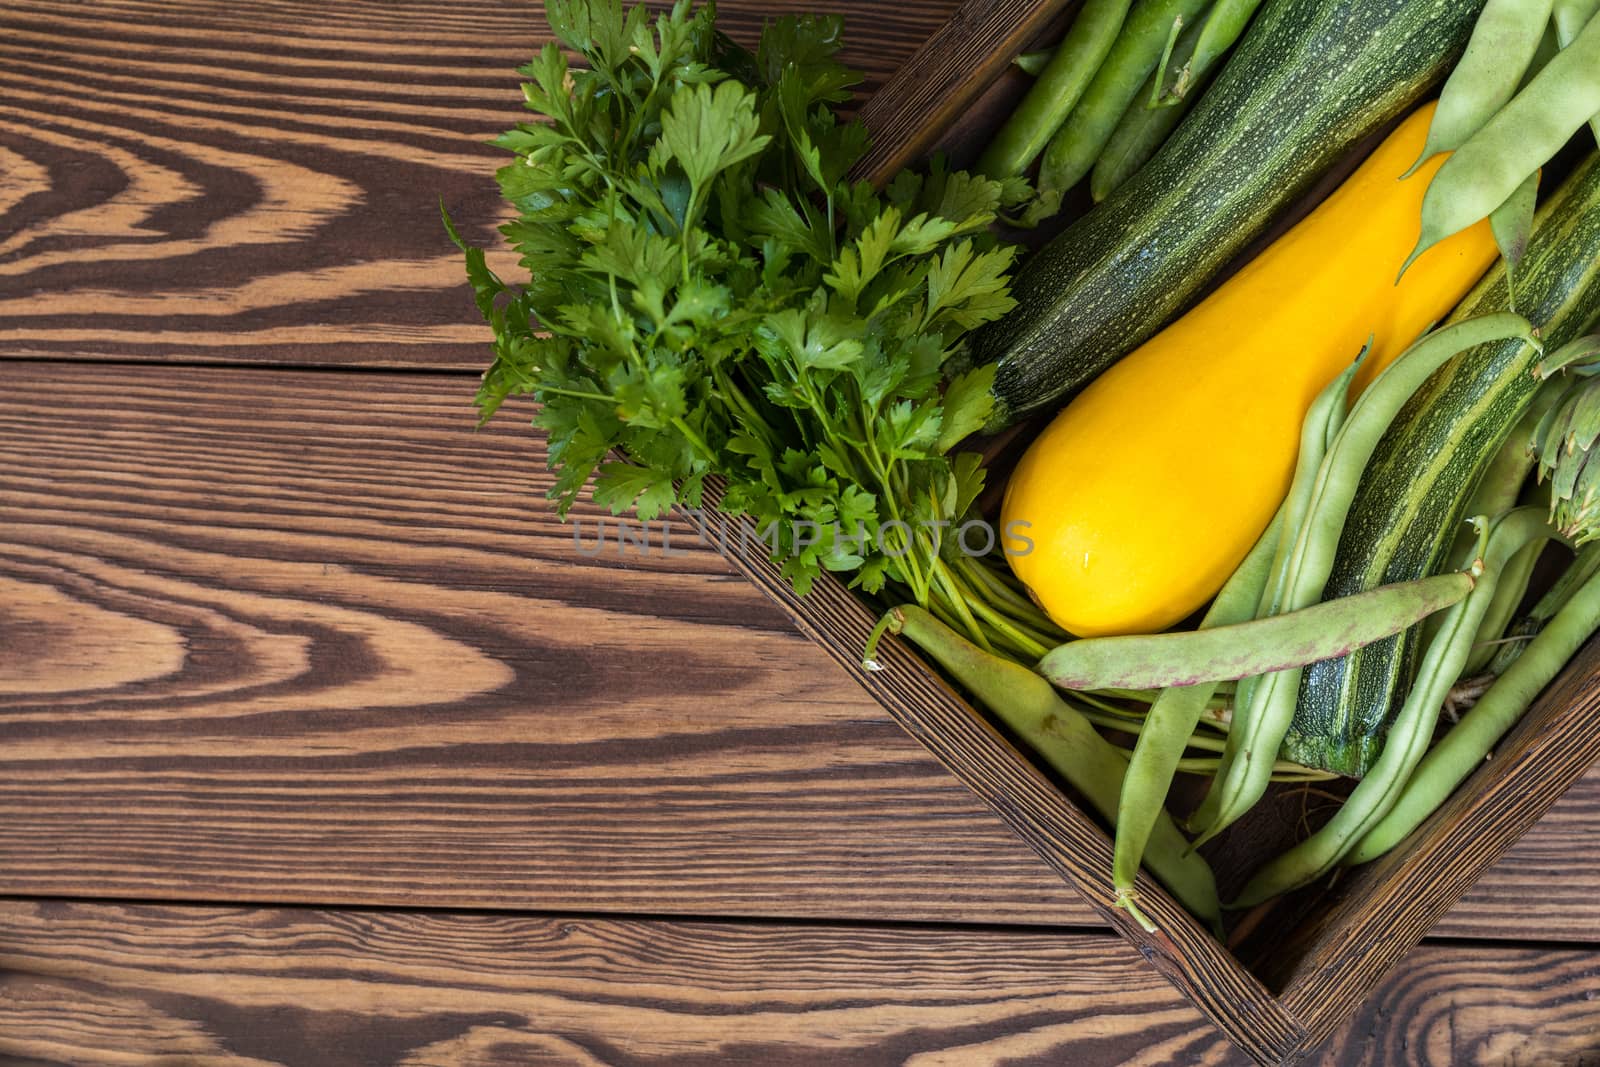 Fresh organic green vegetables wooden floor with copy space. Green and yellow vegetables background. Healthy eating background. Vegetarian food, organic food.